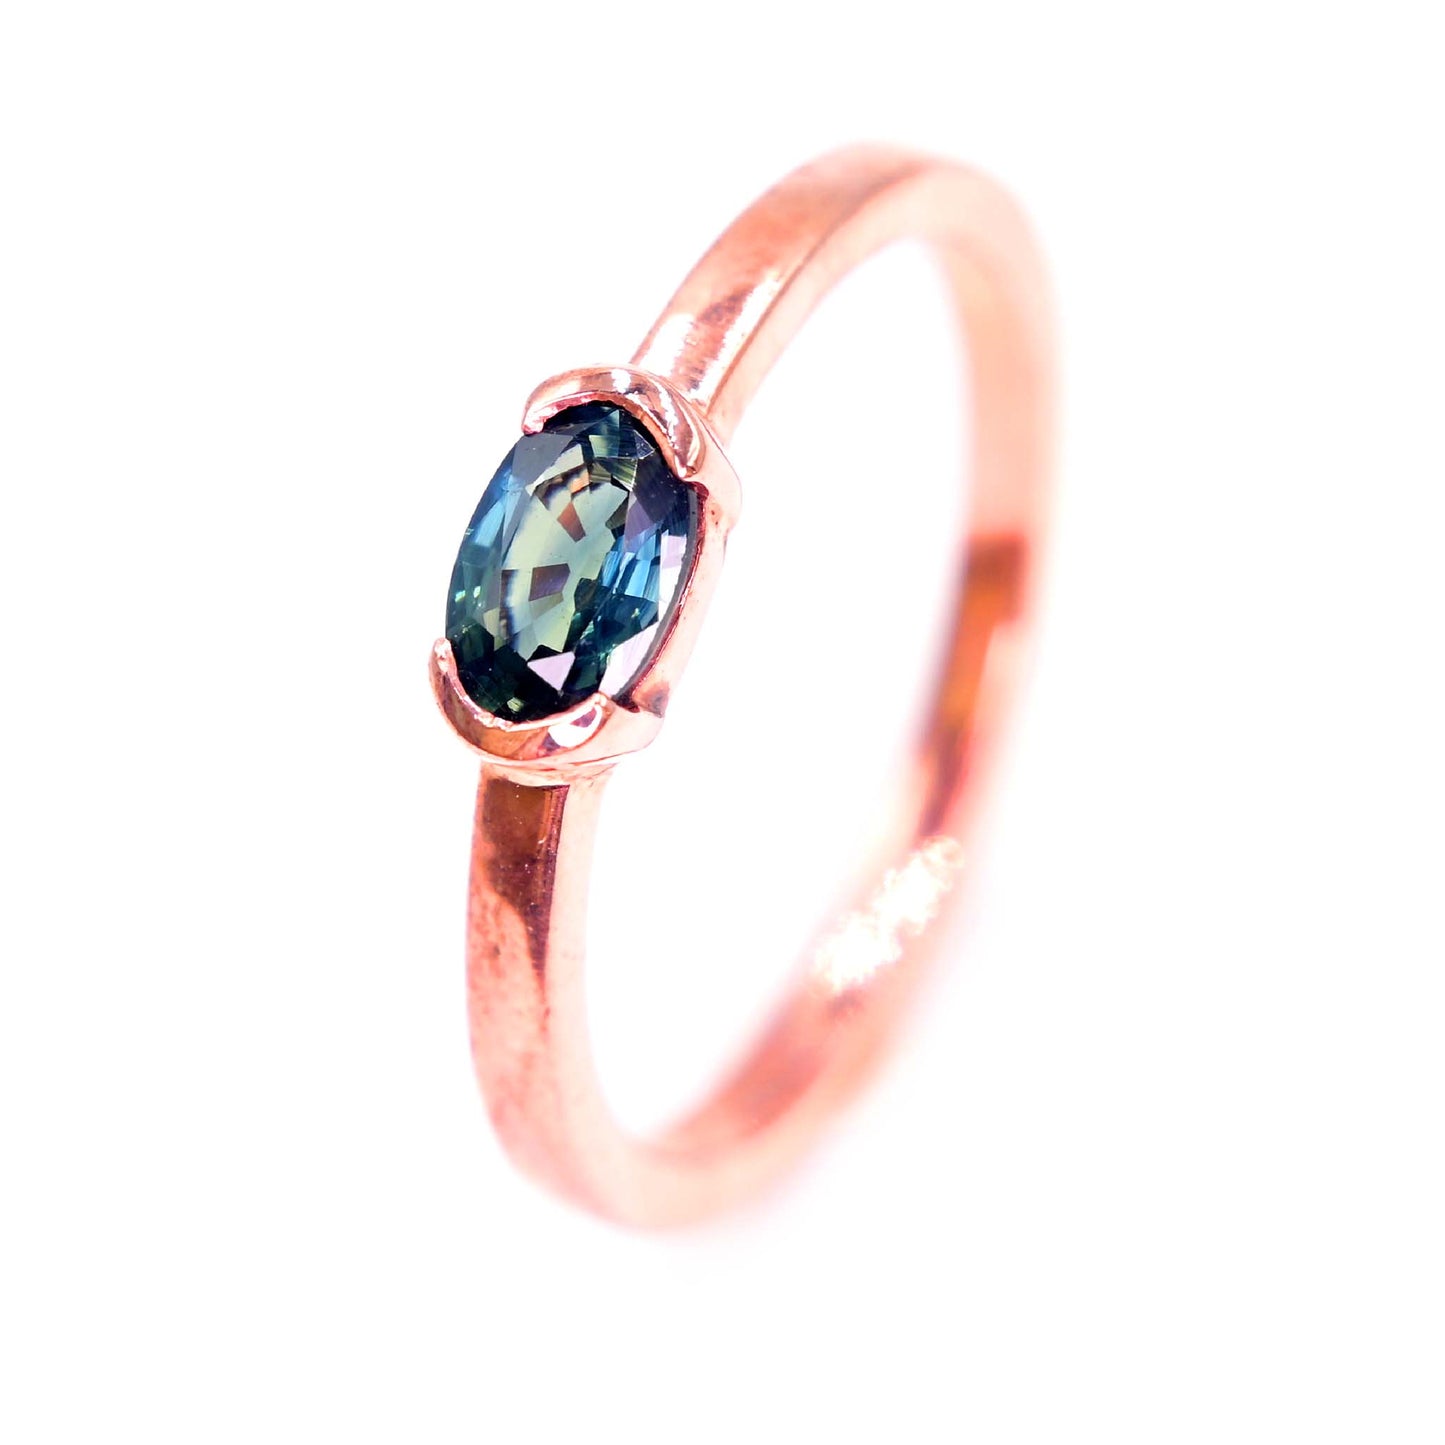 Green sapphire ring set in 14k rose gold